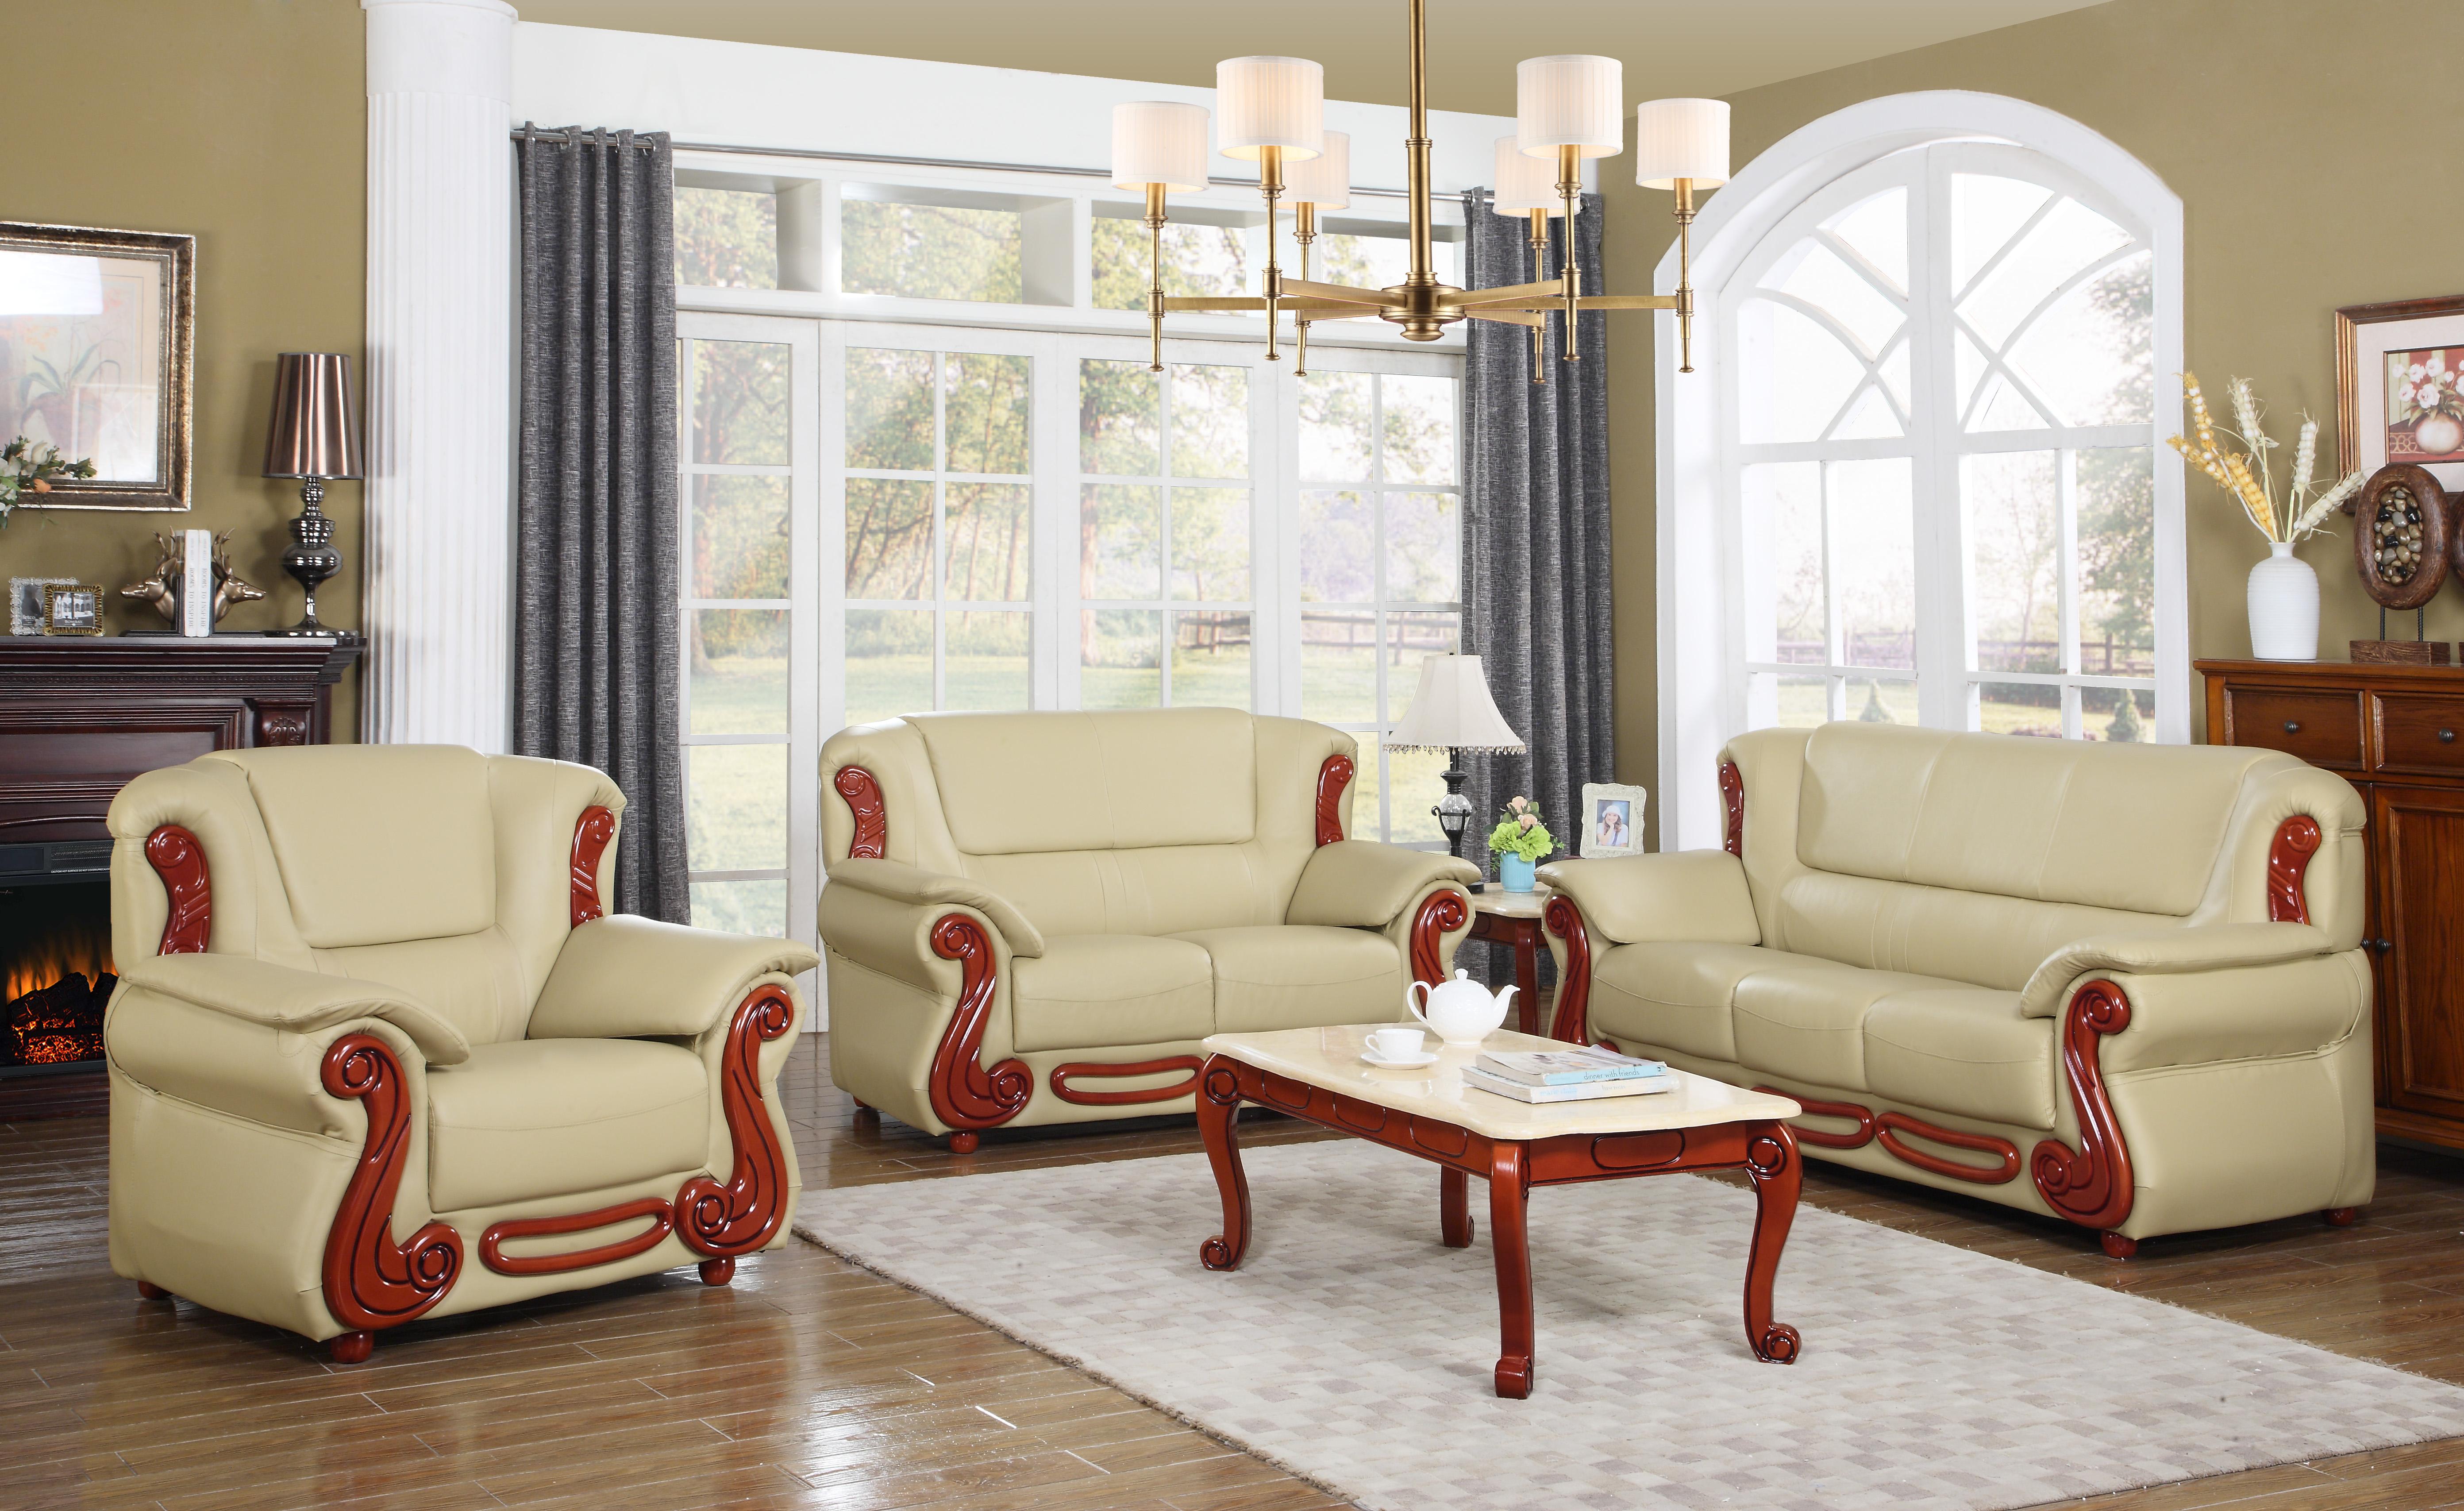 

    
Meridian 632 Bella Khaki Bonded Leather Living Room Set 3Ps Traditional Classic
